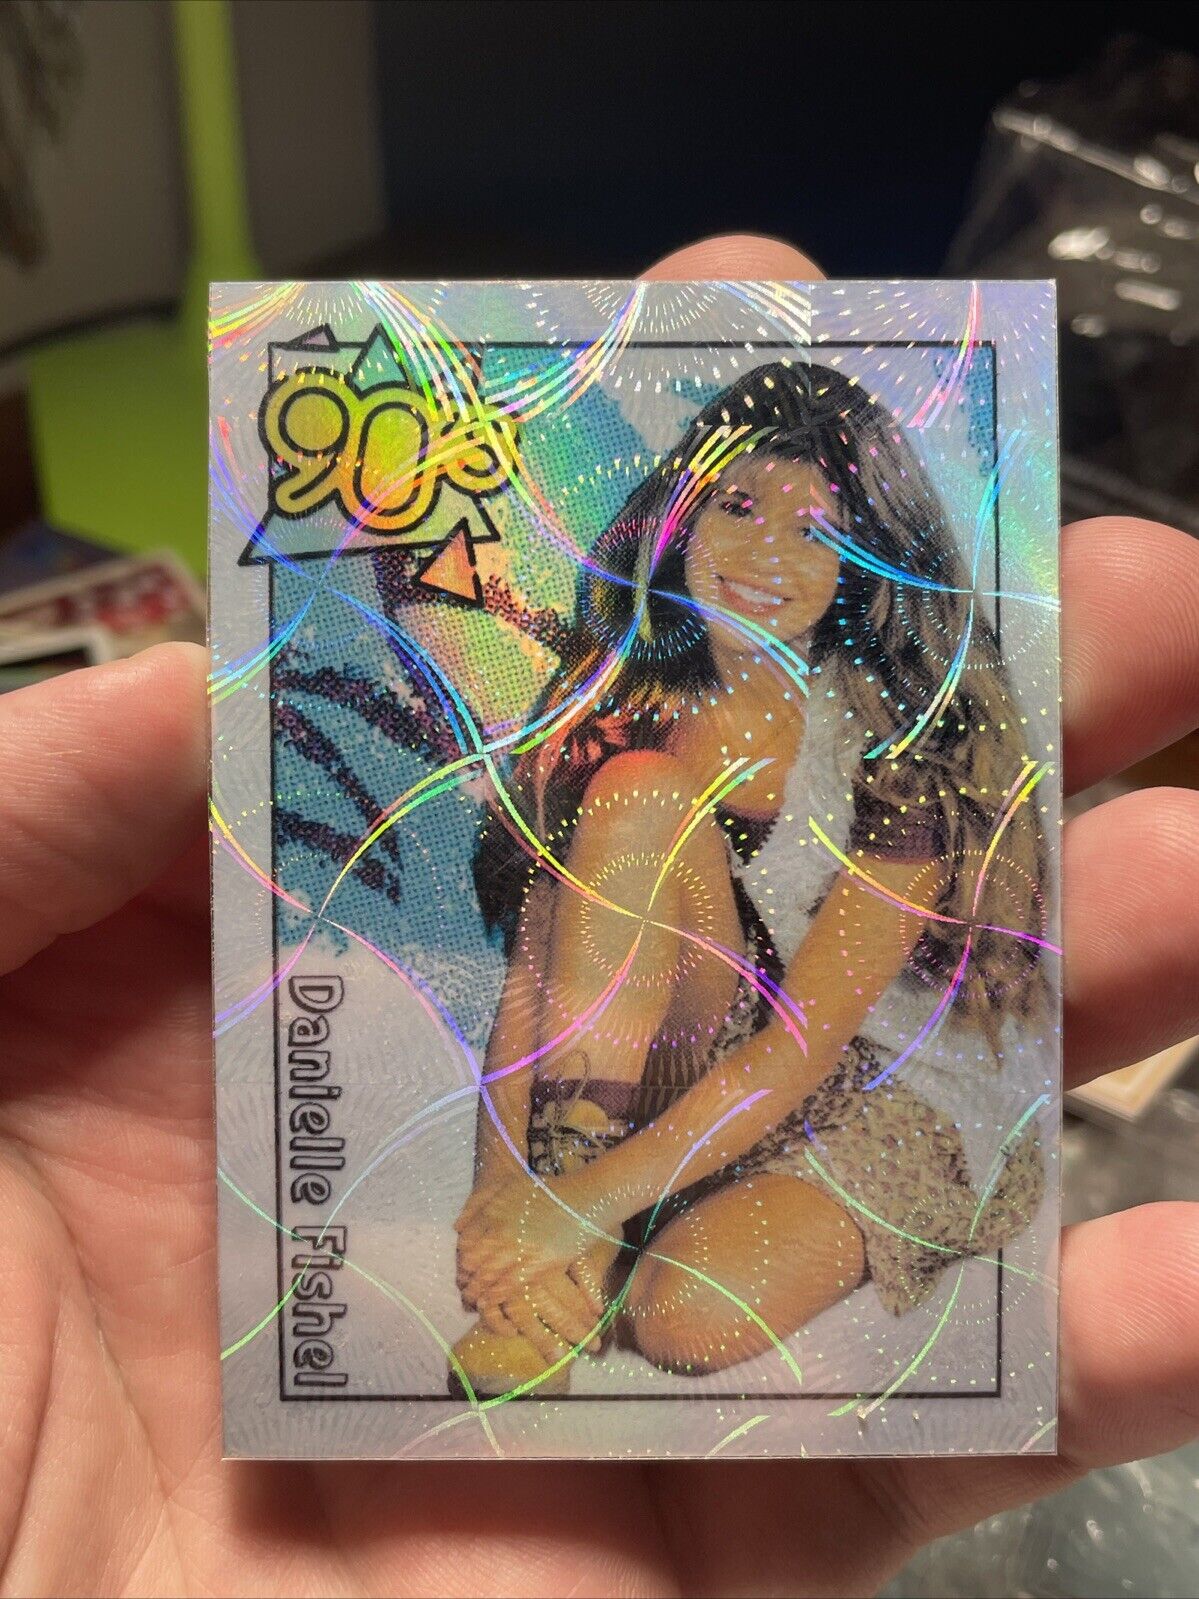 Limited Edition Custom Danielle Fishel Refractor Trading Card By MPRINTS